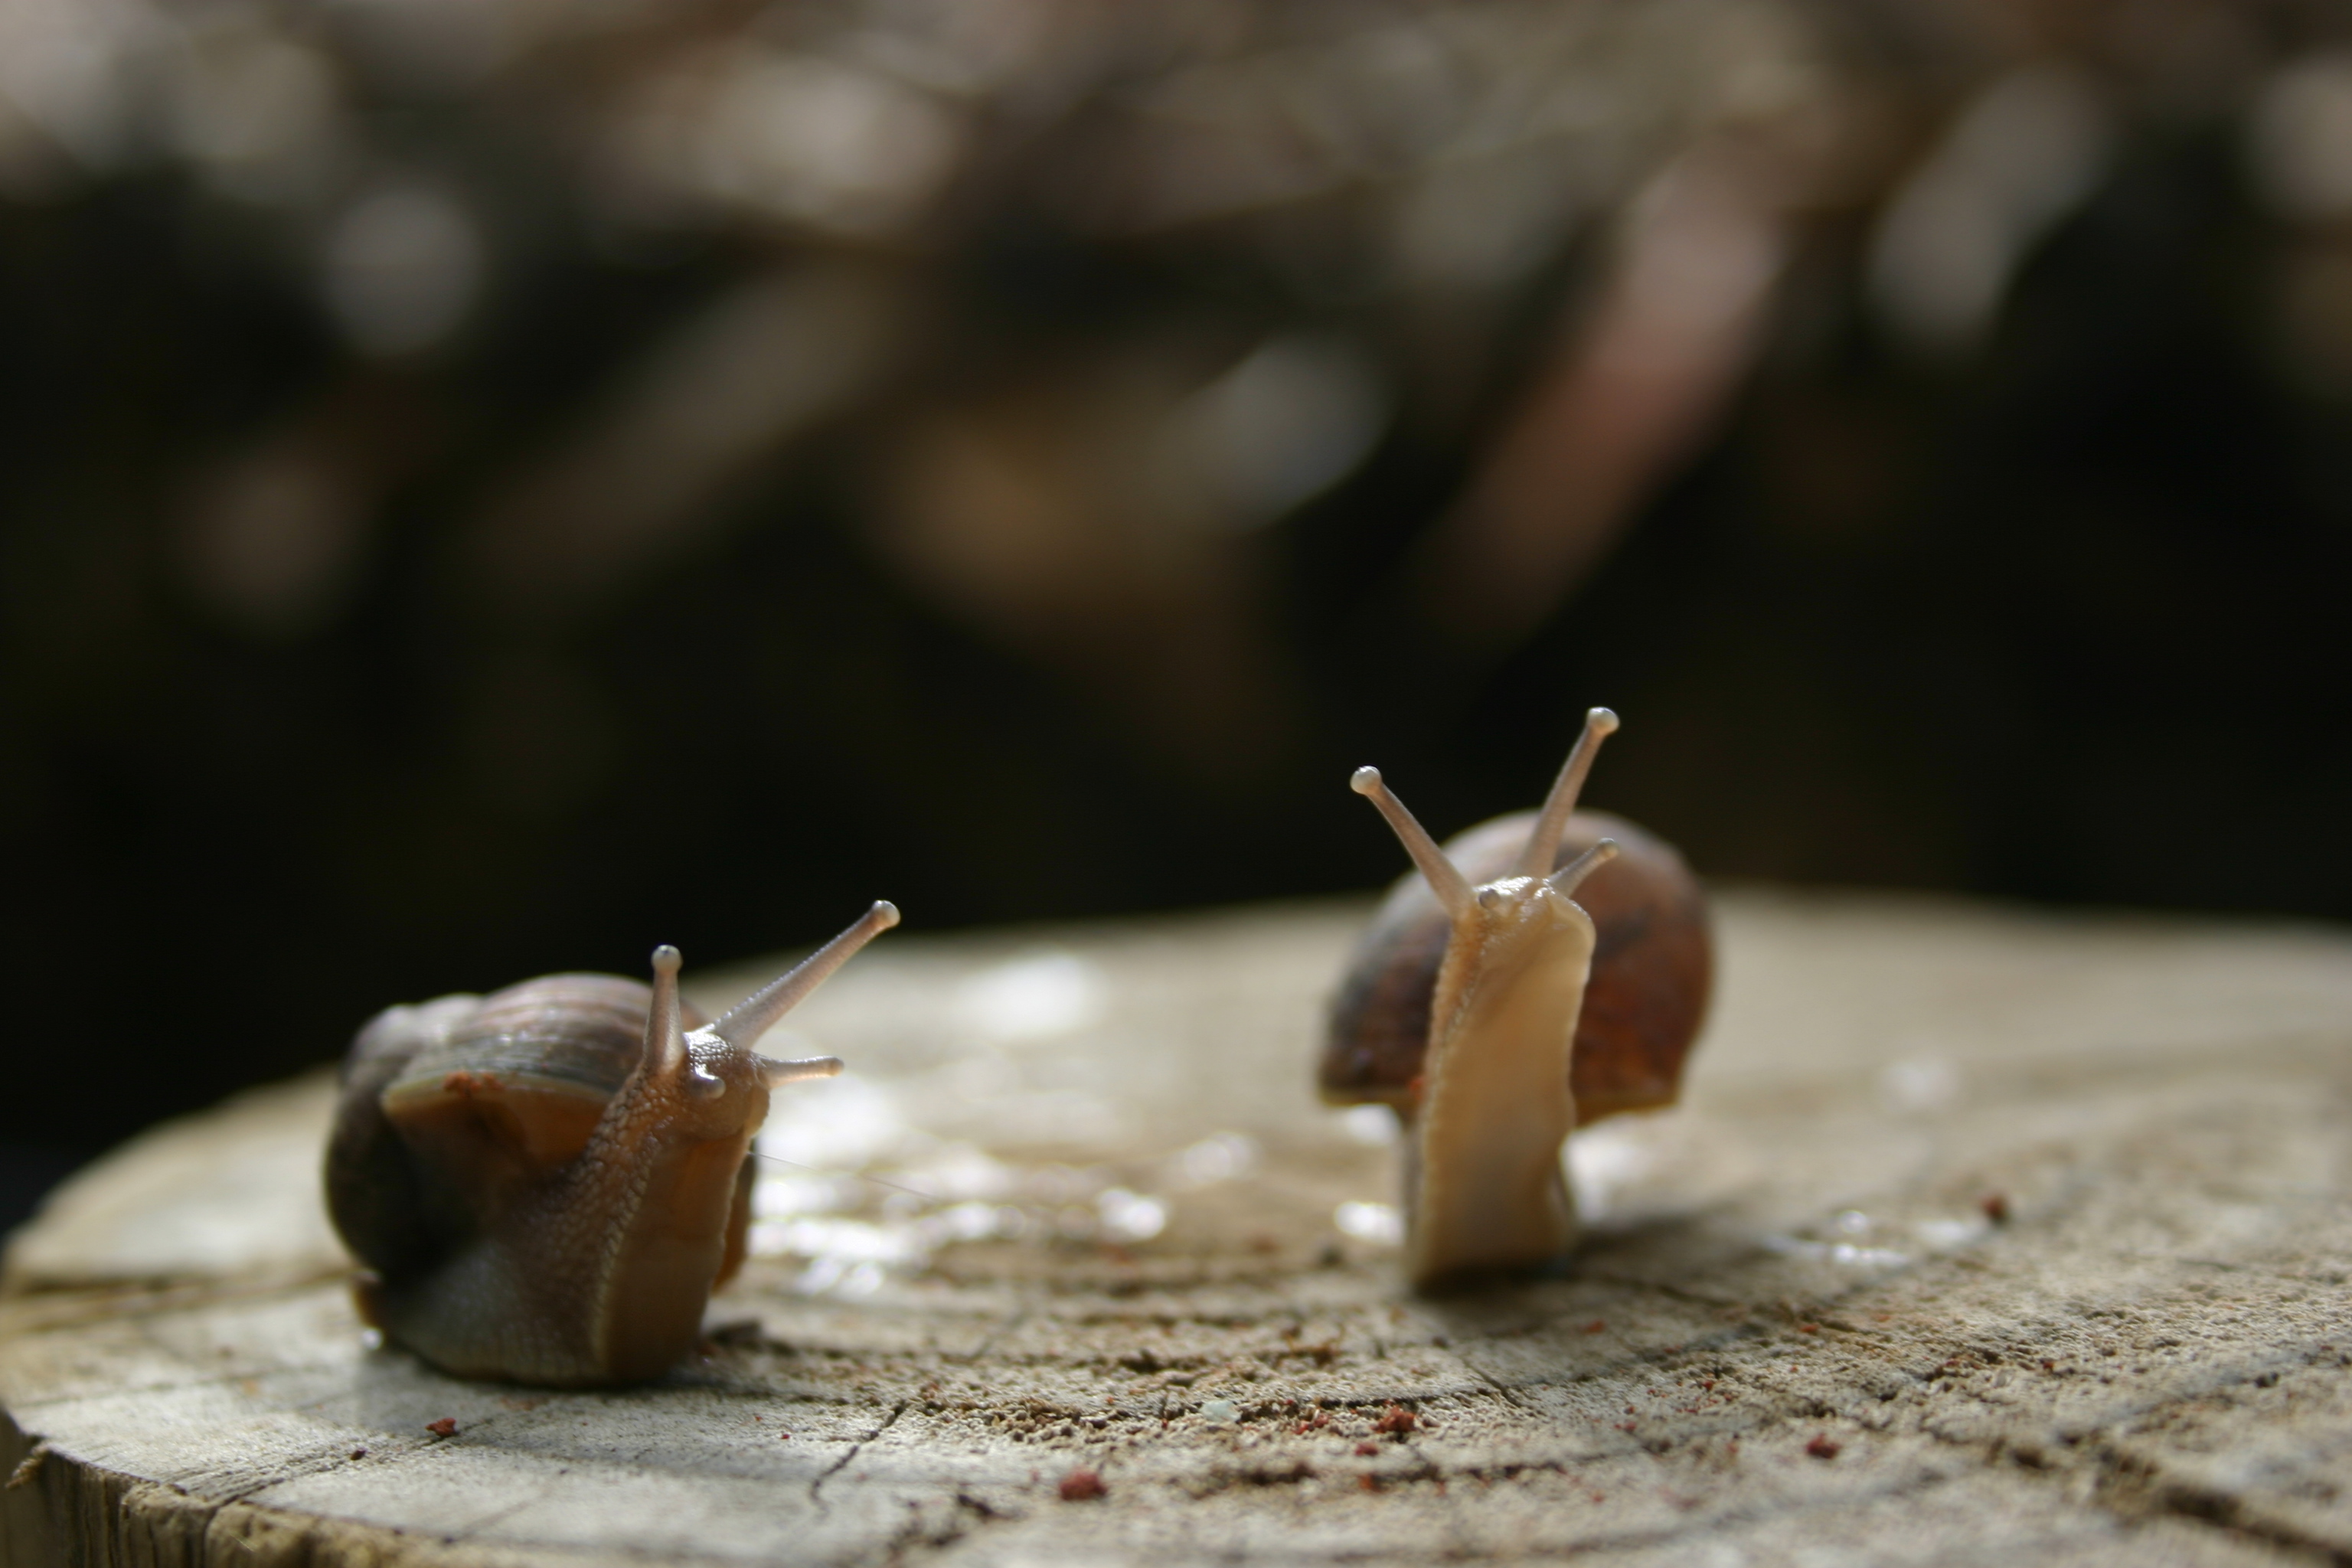 This pair of snails appear to be looking at something over my right shoulder. 